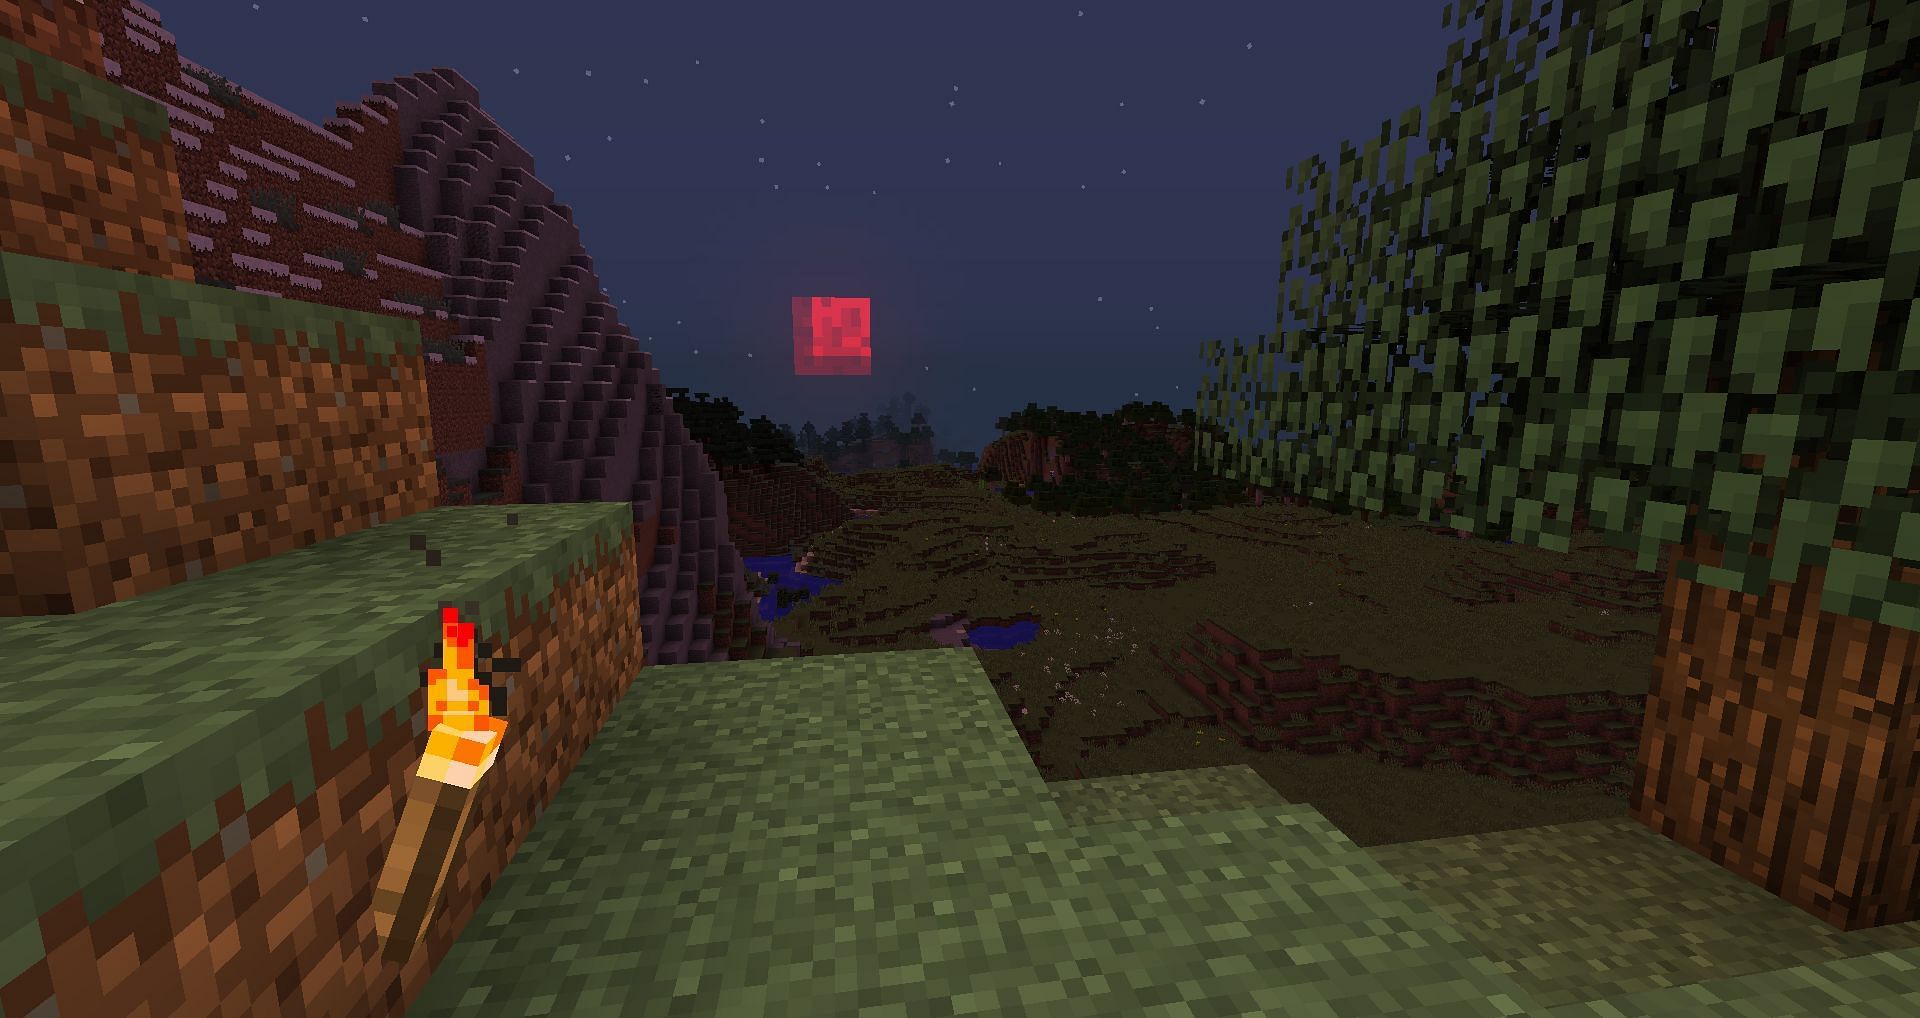 Bloodmoon turns the moon red and increases hostile mob spawning in Minecraft (Image via CurseForge)